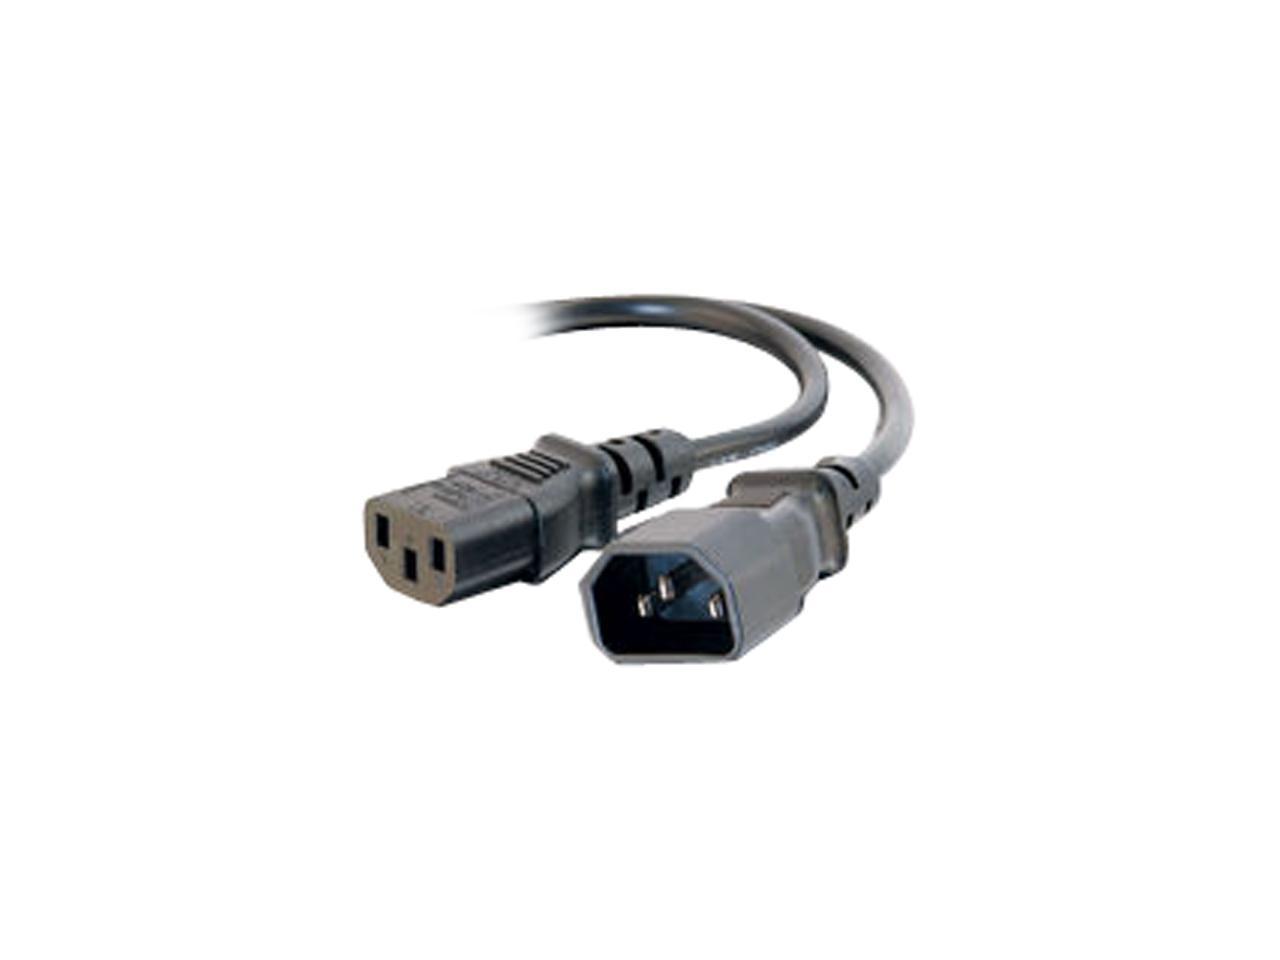 C2G 29965 16 AWG 250 Volt Power Extension Cord - IEC320C14 to IEC320C13, TAA Compliant, Black (2 Feet, 0.60 Meters)